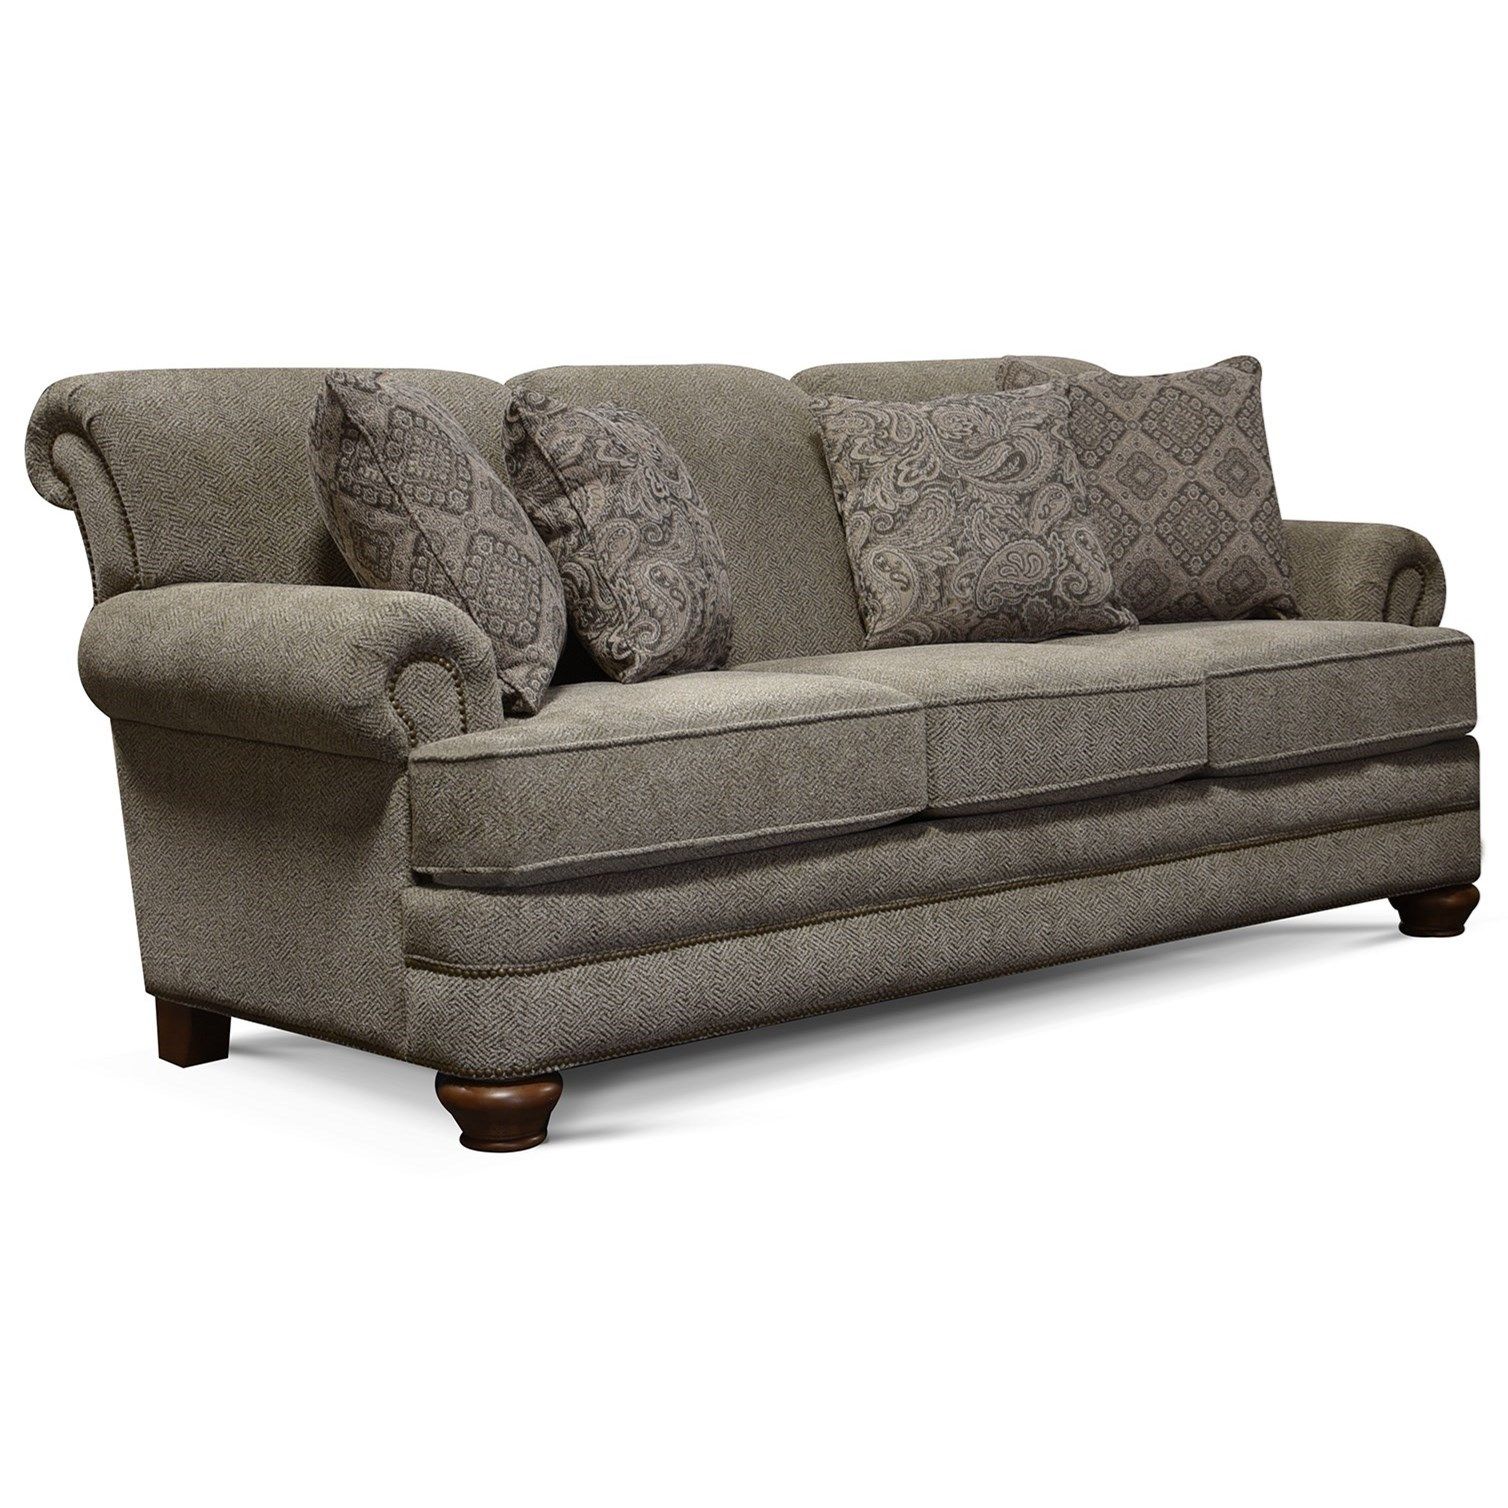 England 5q00/n Series Traditional Sofa With Nailhead Trim | Superstore |  Uph – Stationary Sofas Pertaining To Sofas With Nailhead Trim (View 5 of 15)